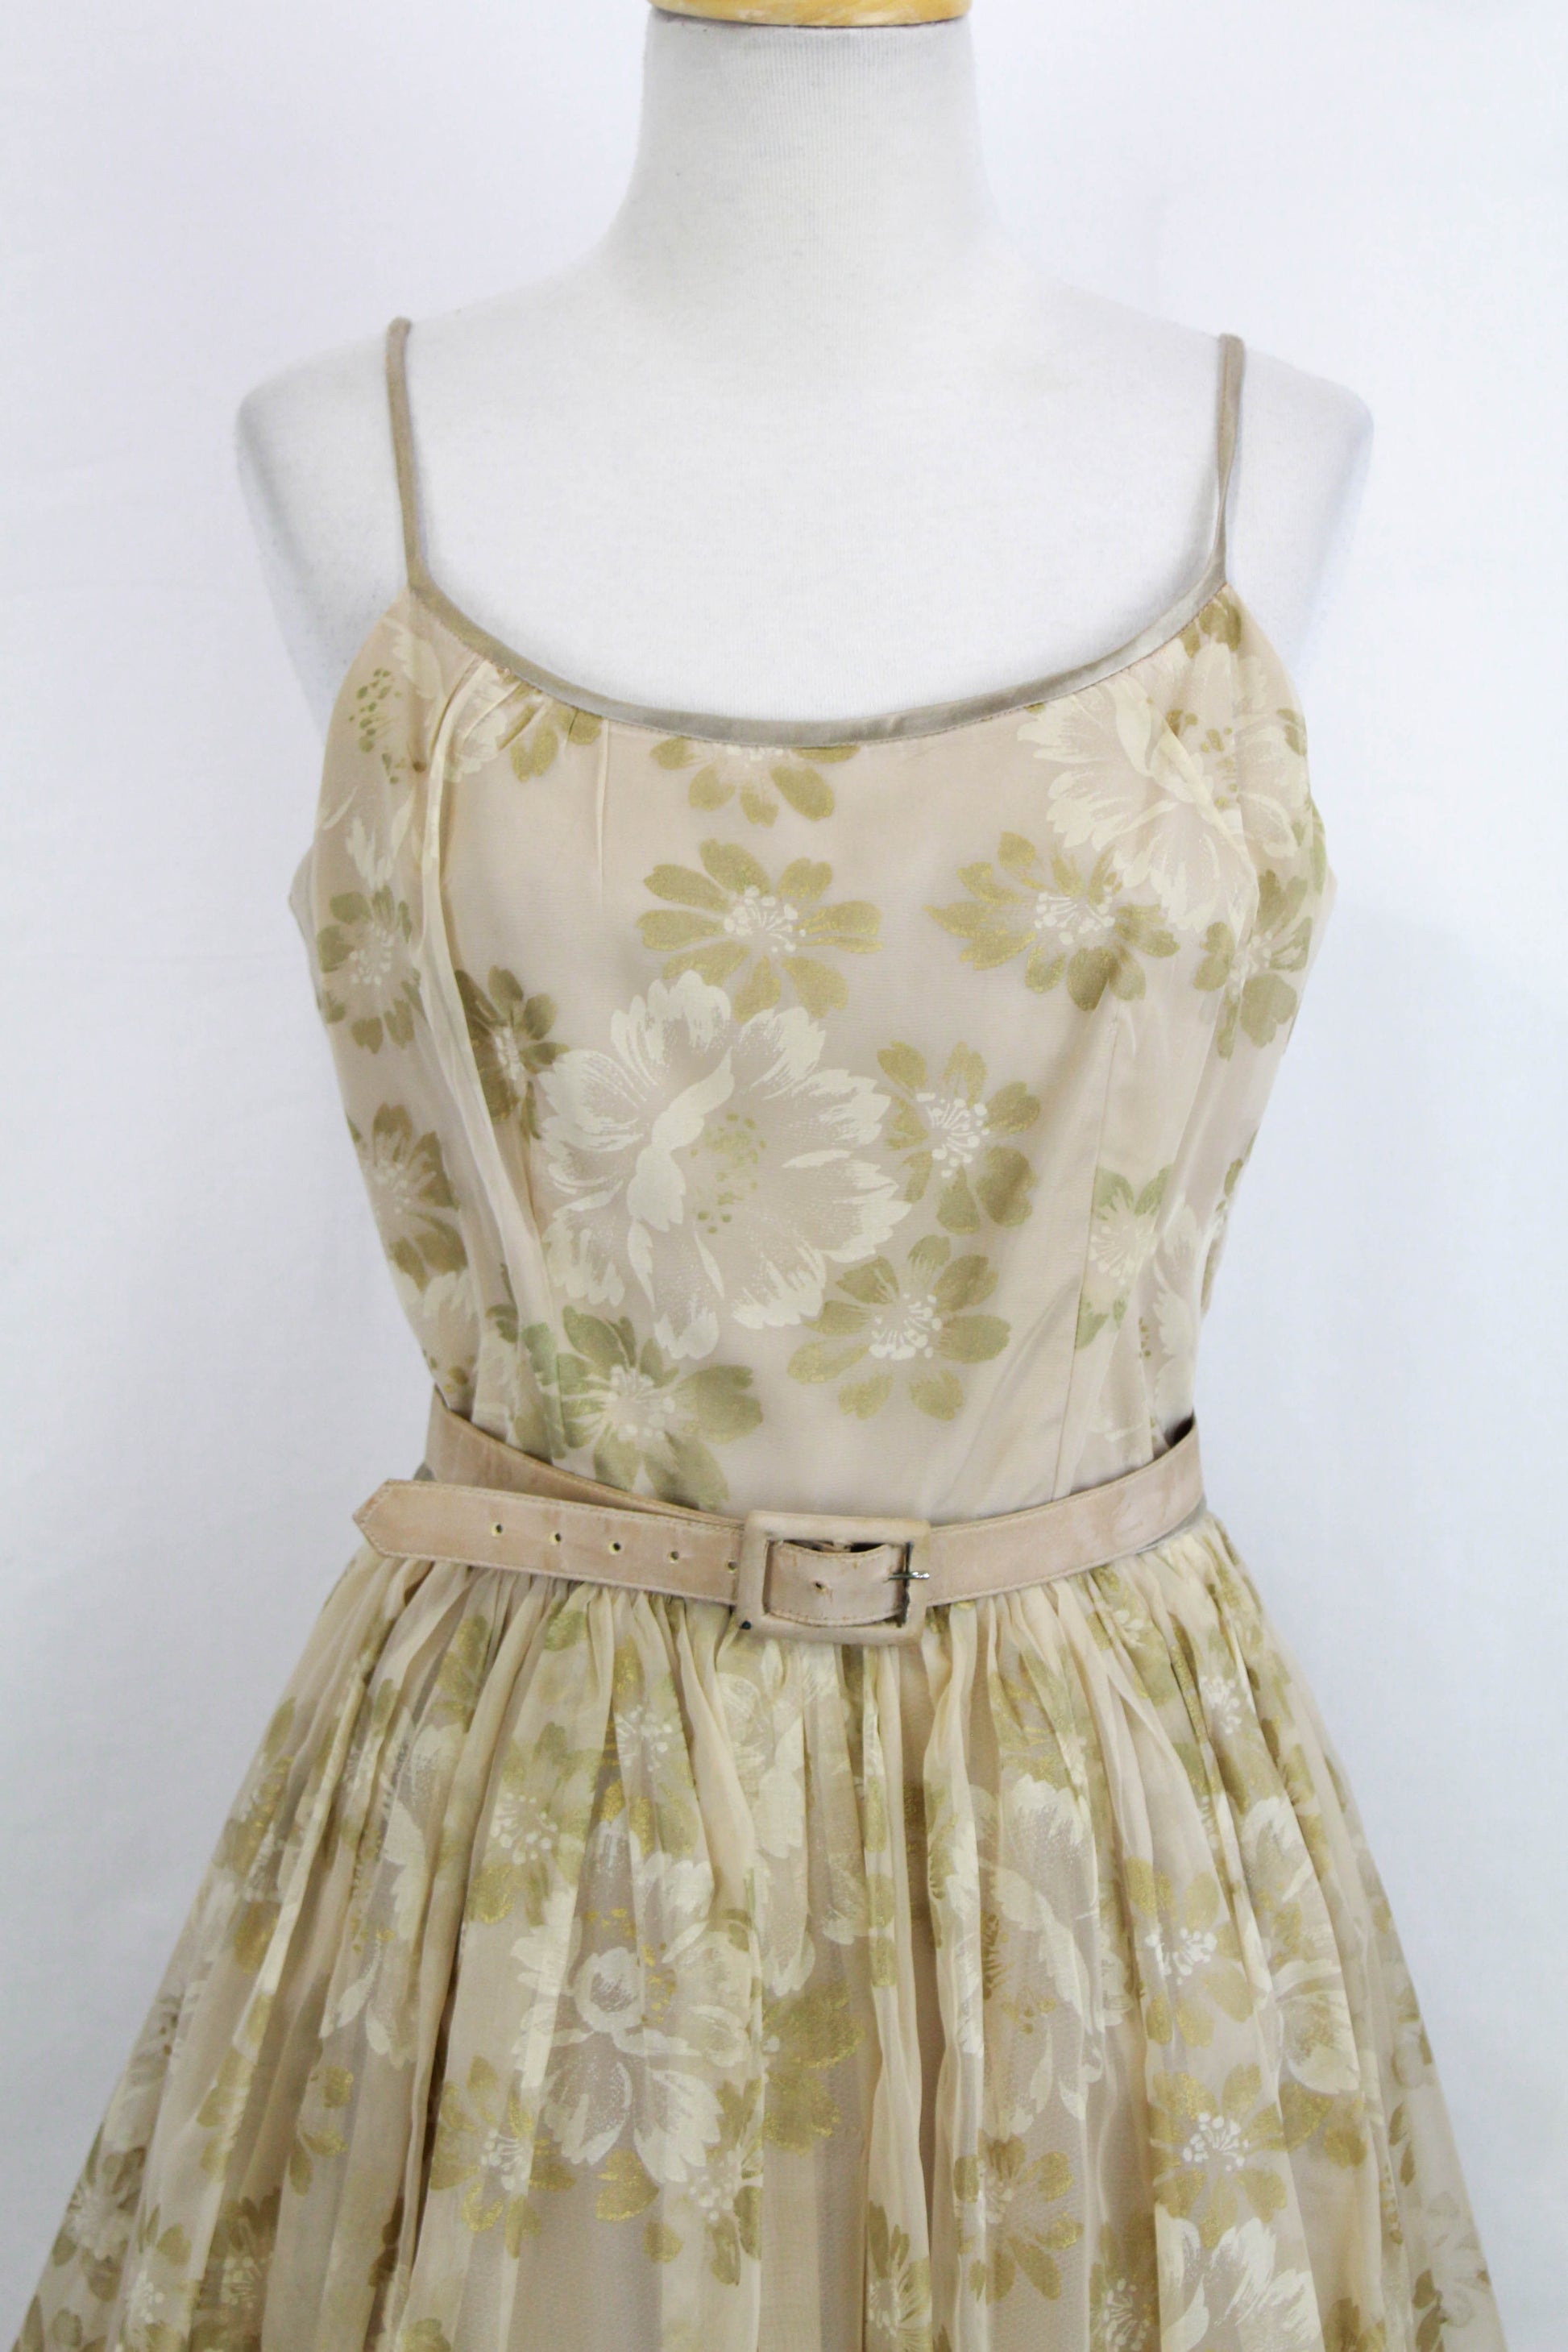 1950s Taupe Floral Print Chiffon Party Dress, Full Skirt Gathered with Matching Belt, Vintage 50s Womens Fit and Flare, True Vintage, Ian Drummond Vintage